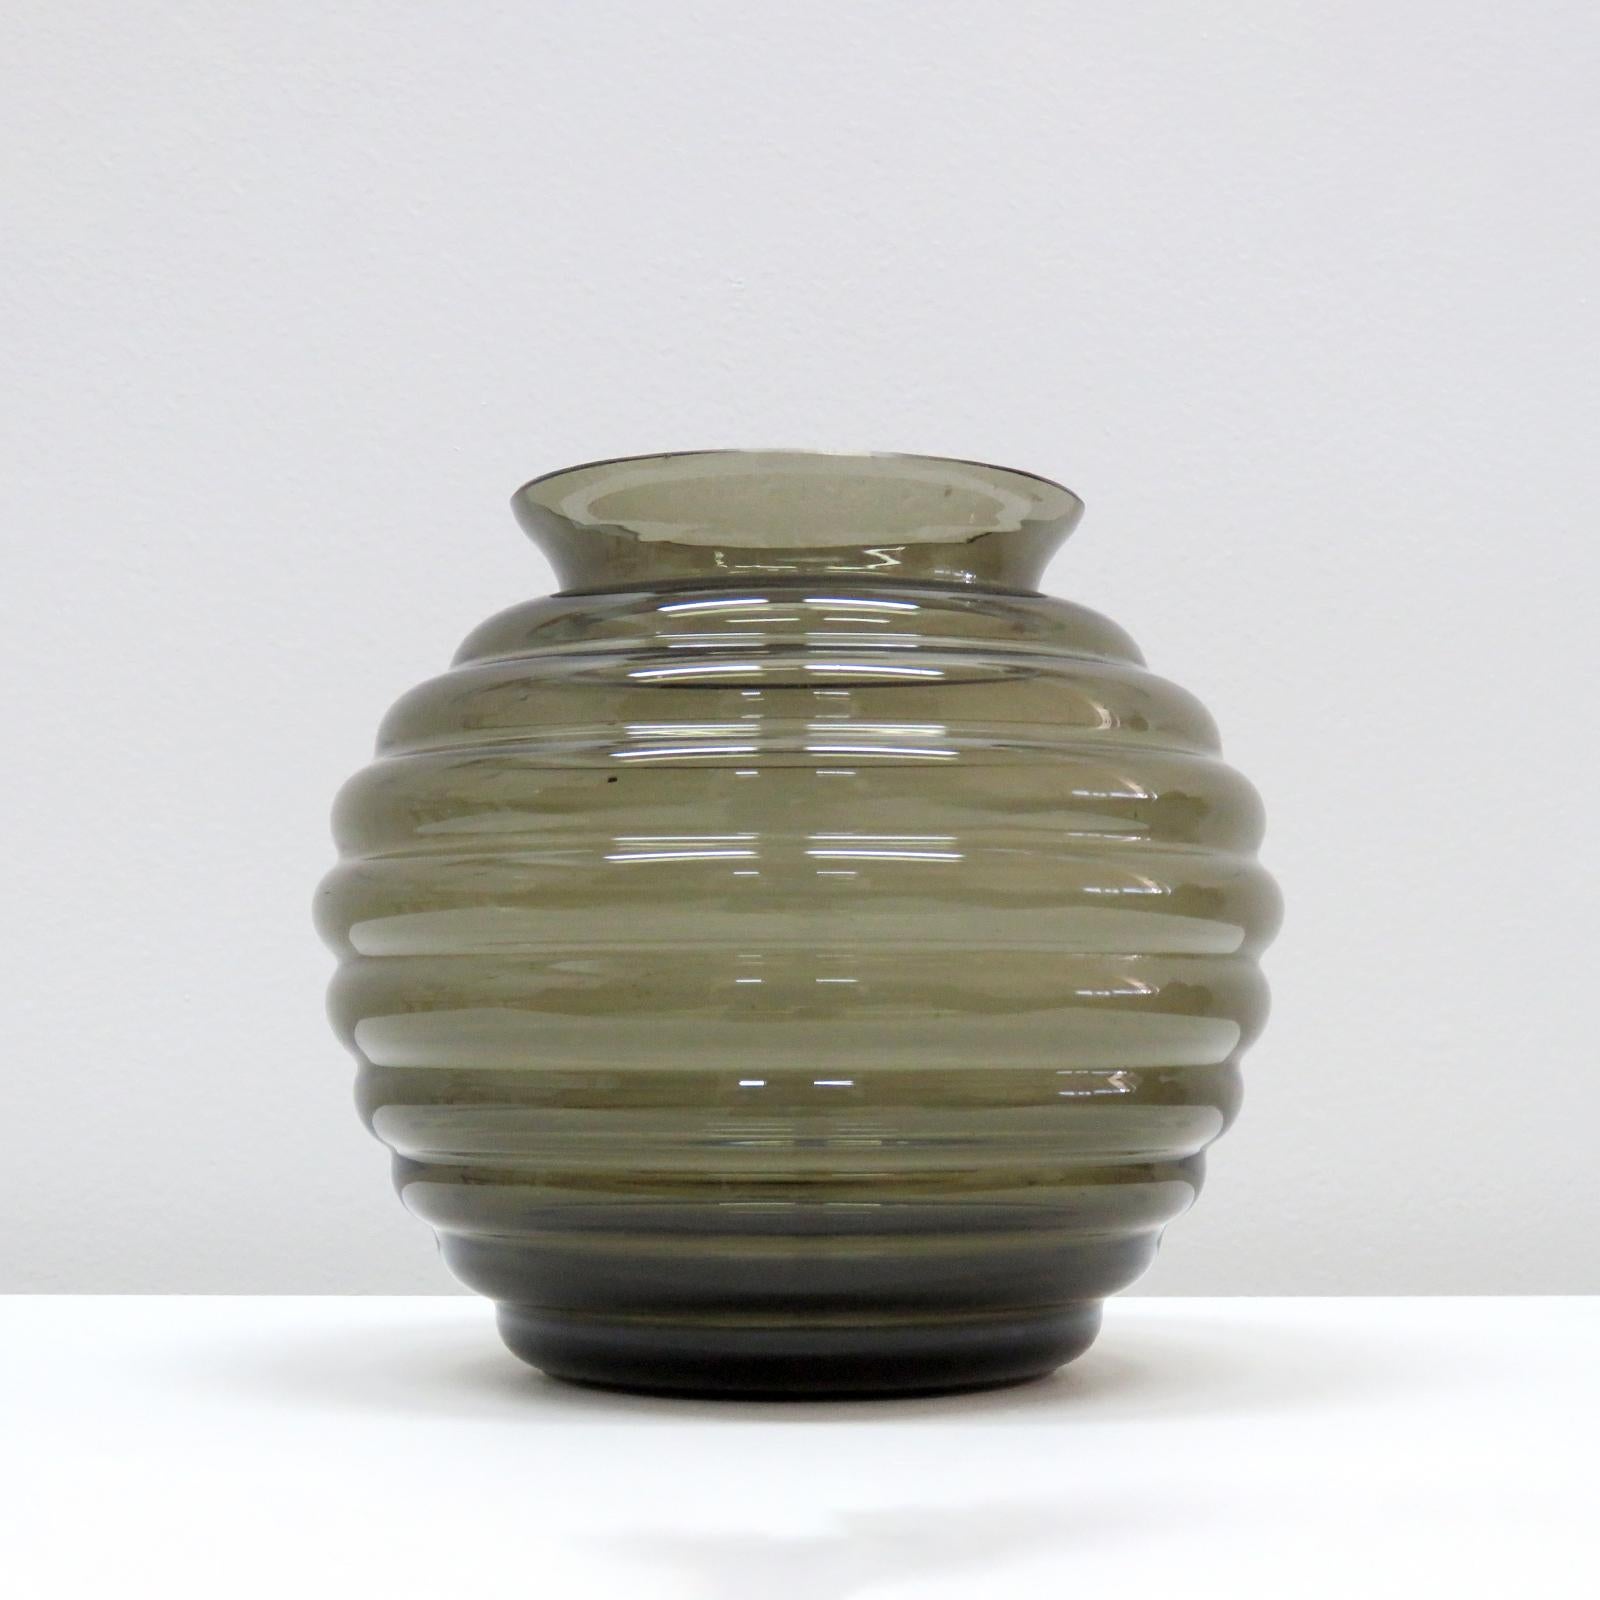 wonderful turmalin vase 'Felicitas' designed by Richard Lauke for Glasfabrik Weißwasser, produced in 1939, the largest model in this series.